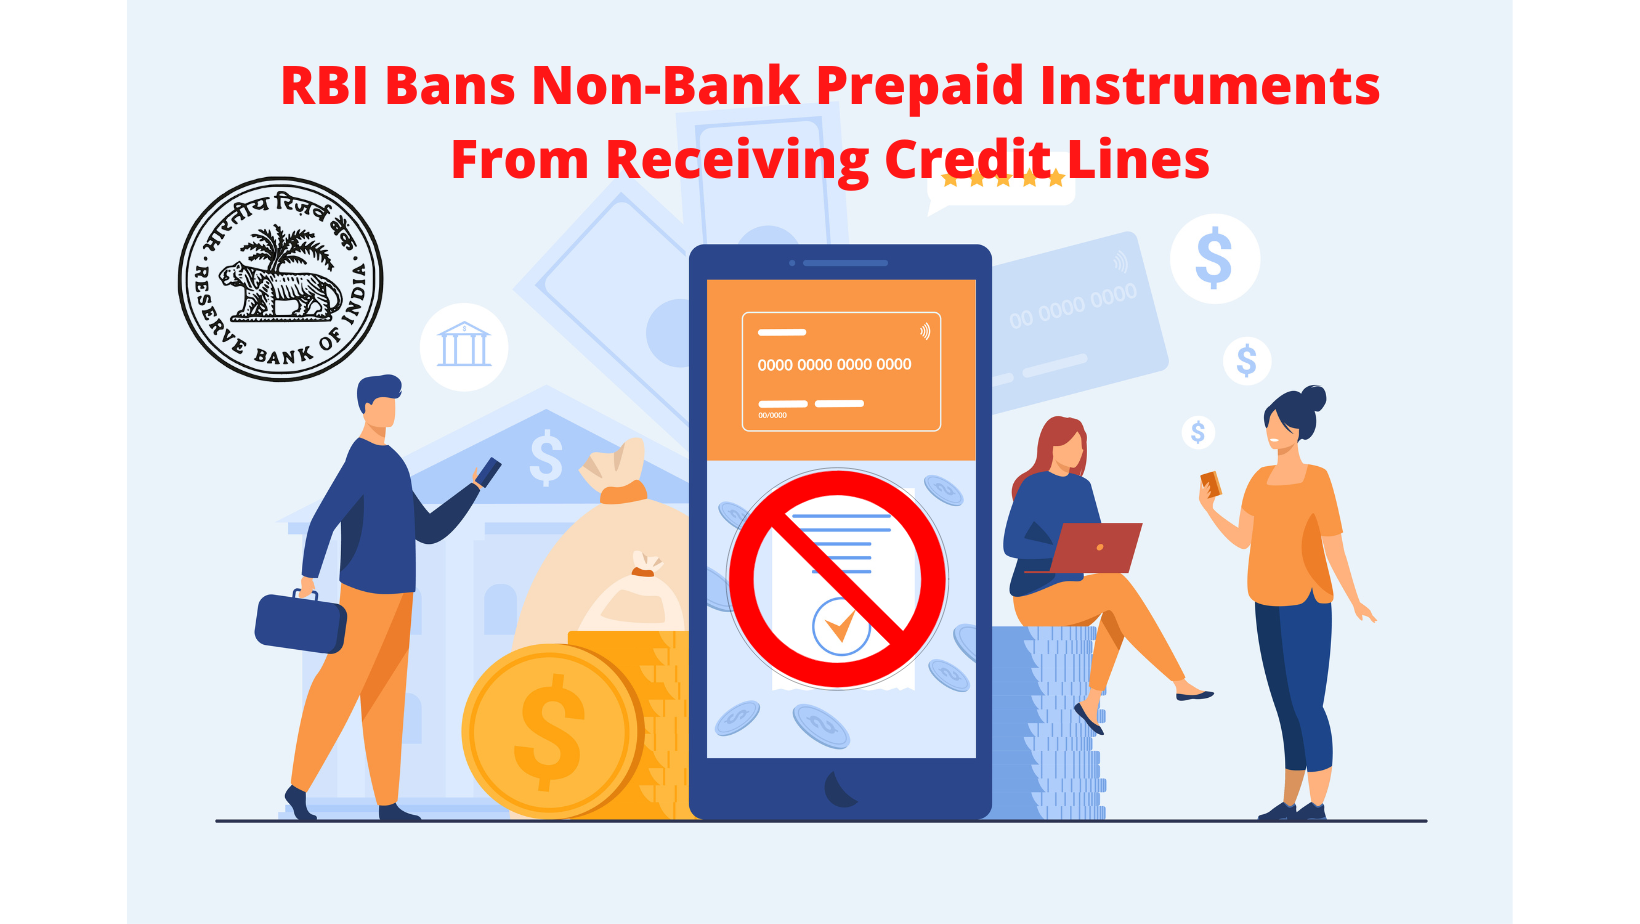 Rbi_Bans_Non_bank_Prepaid_Instruments_From_Receiving_Credit_Lines_expertateverything